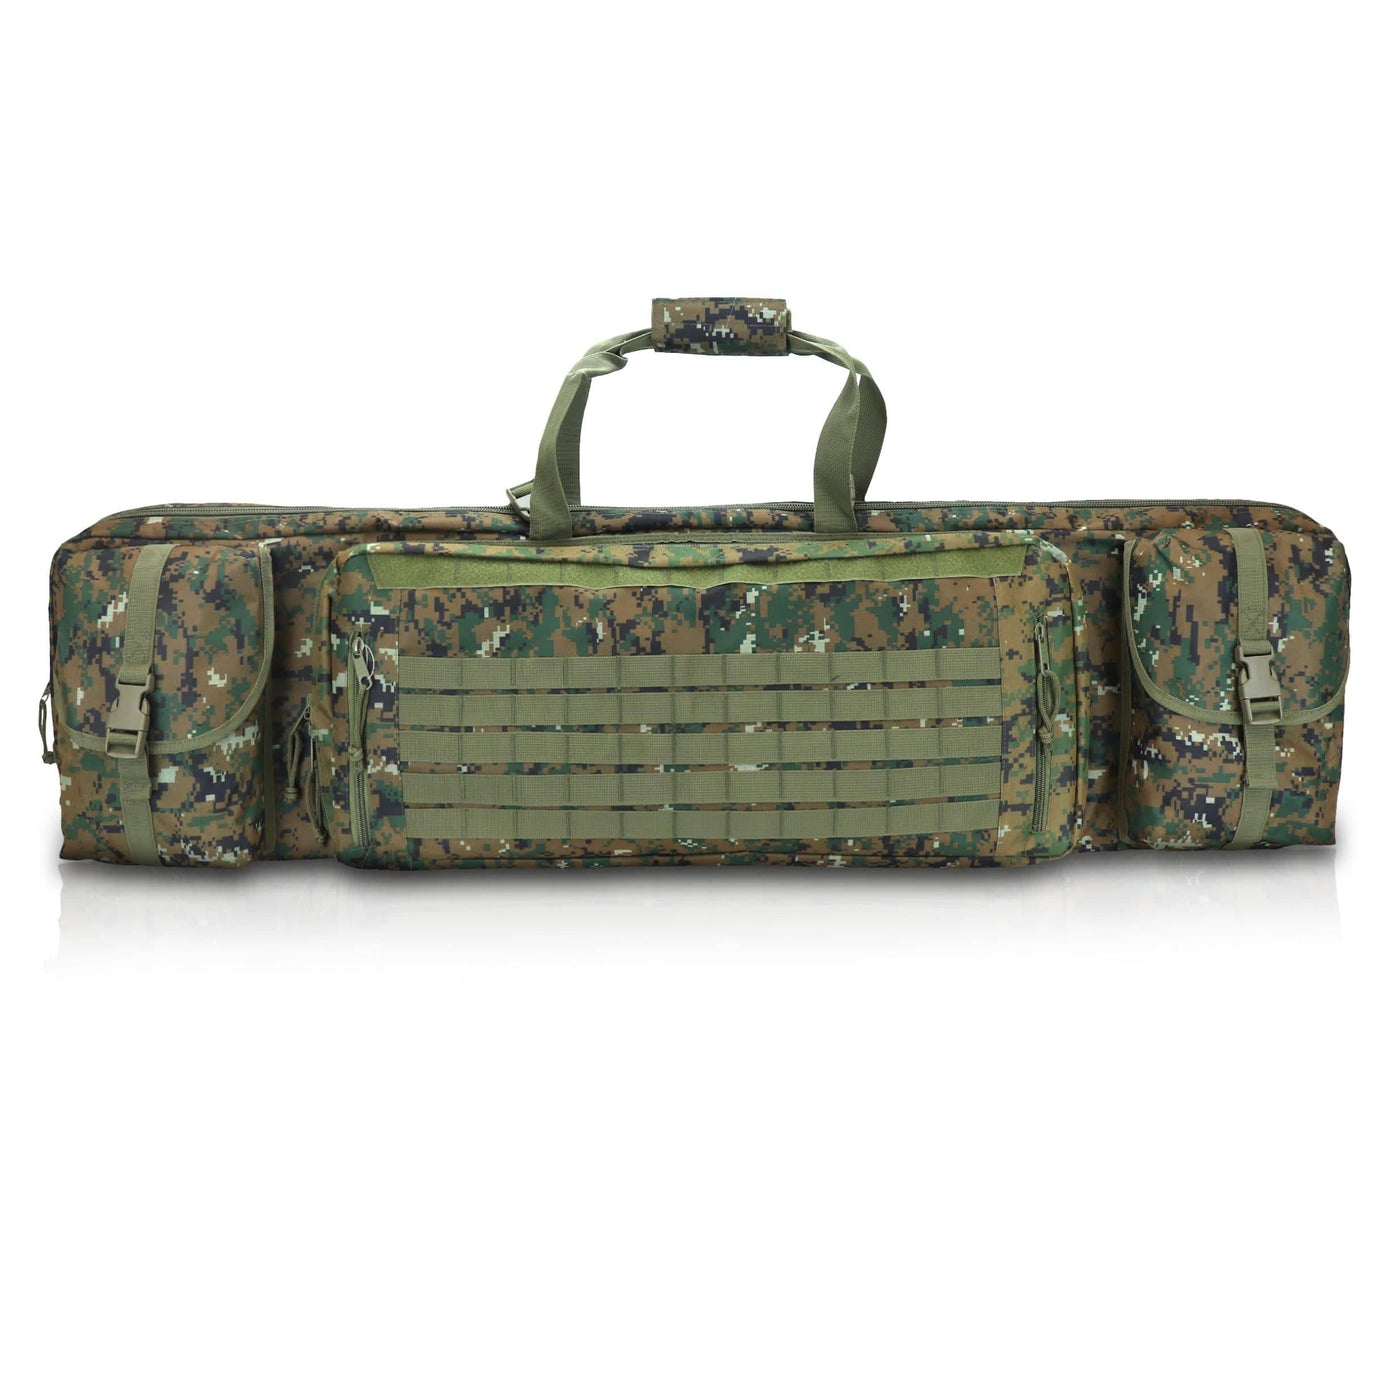 Osage River Osage River 55 in Double Rifle Case Green Digital Camo Shooting